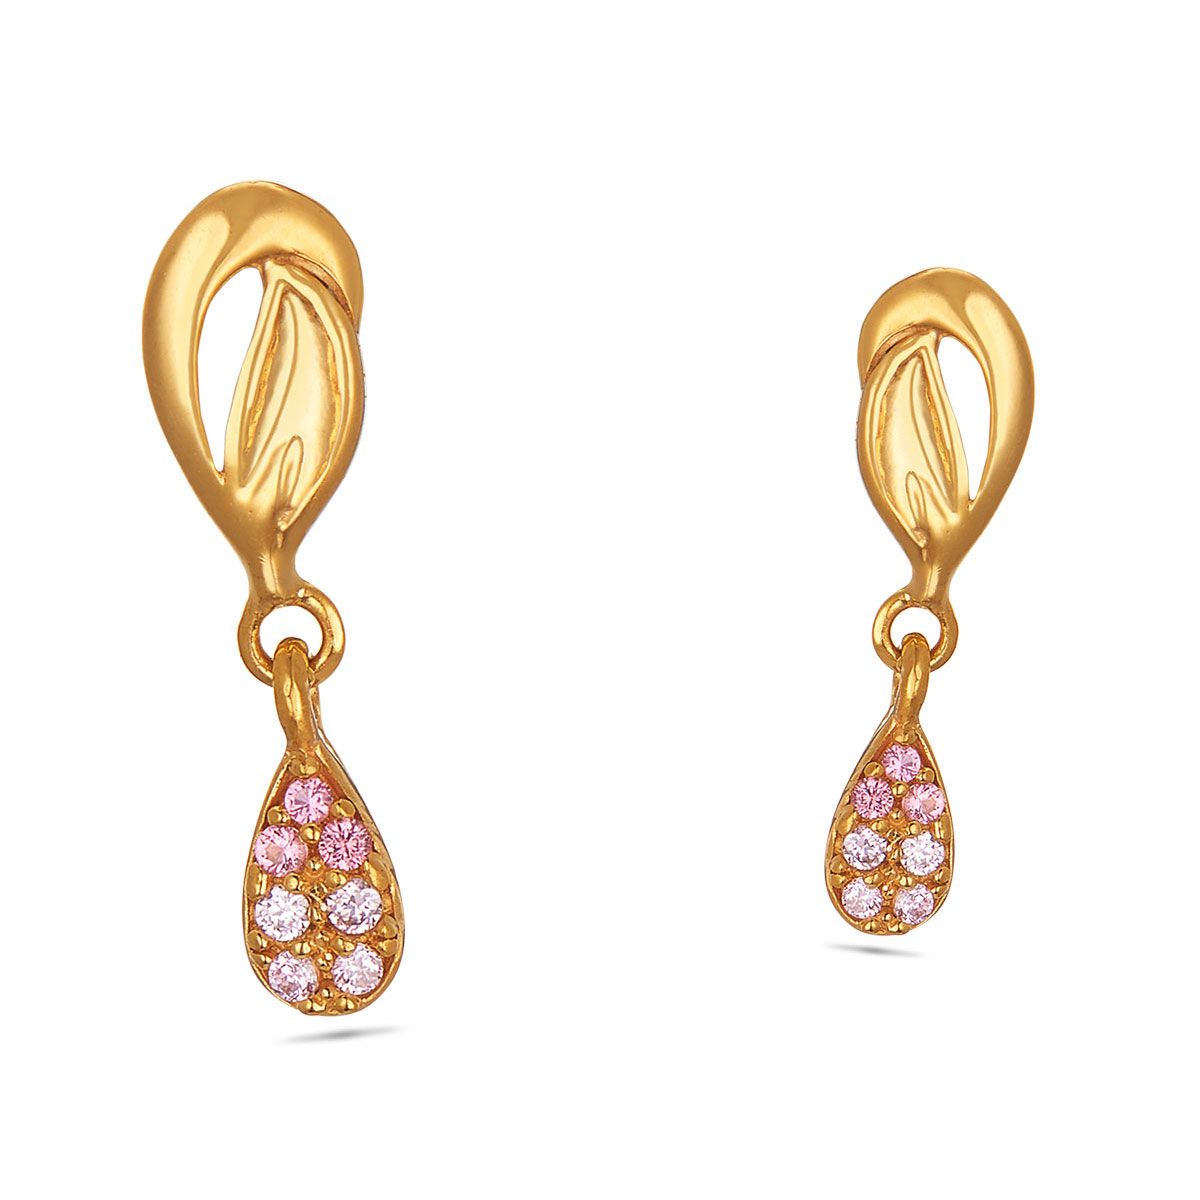 gold earrings  gold earrings online  gold earrings for women  gold studs   gold fancy earrings  gold studs for women  studs